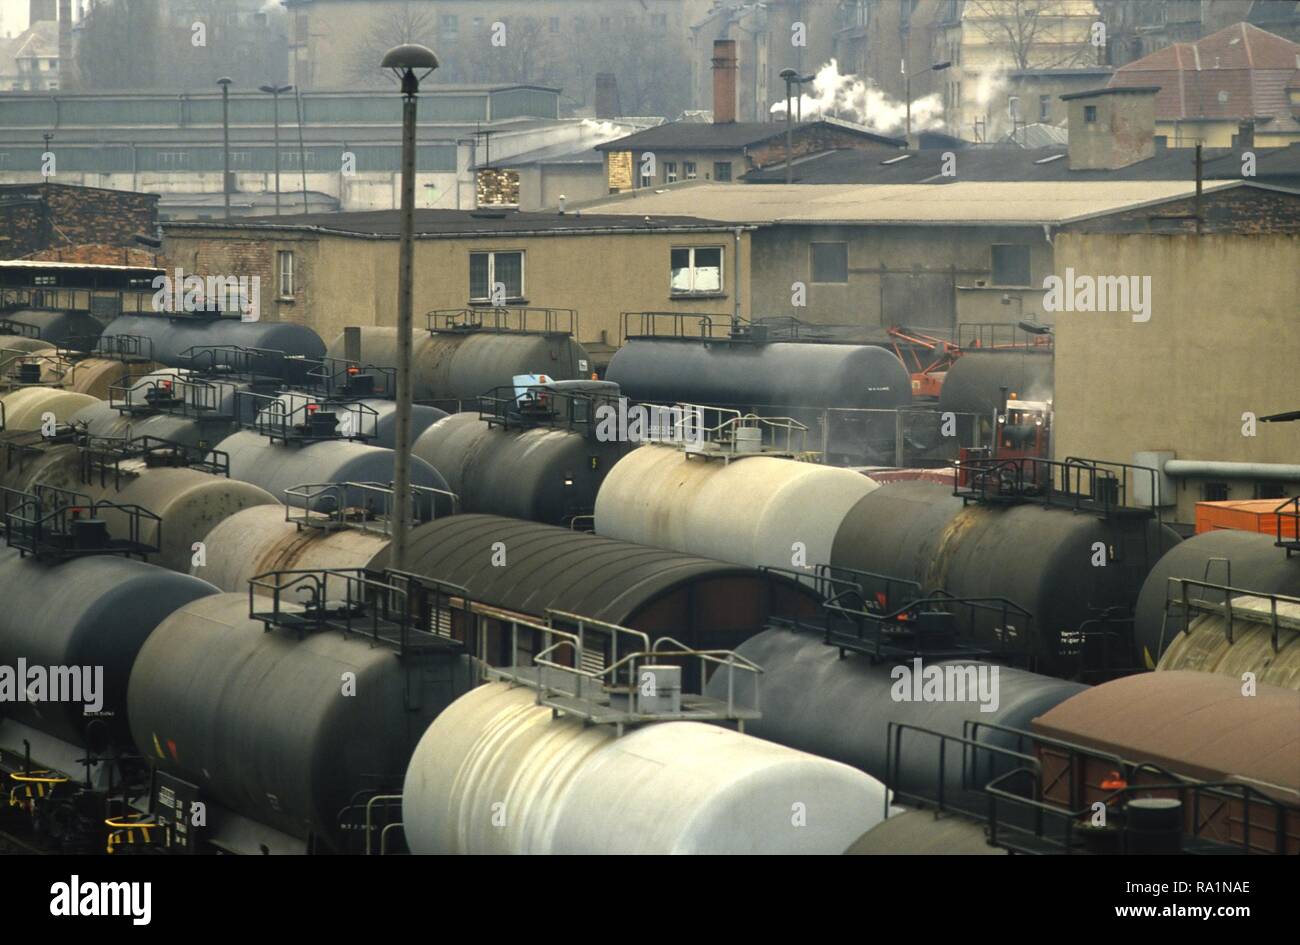 Germany, industrial area in the city of Riesa immediately after the reunification between DDR and the Federal Republic of Germany (March 1991) Stock Photo